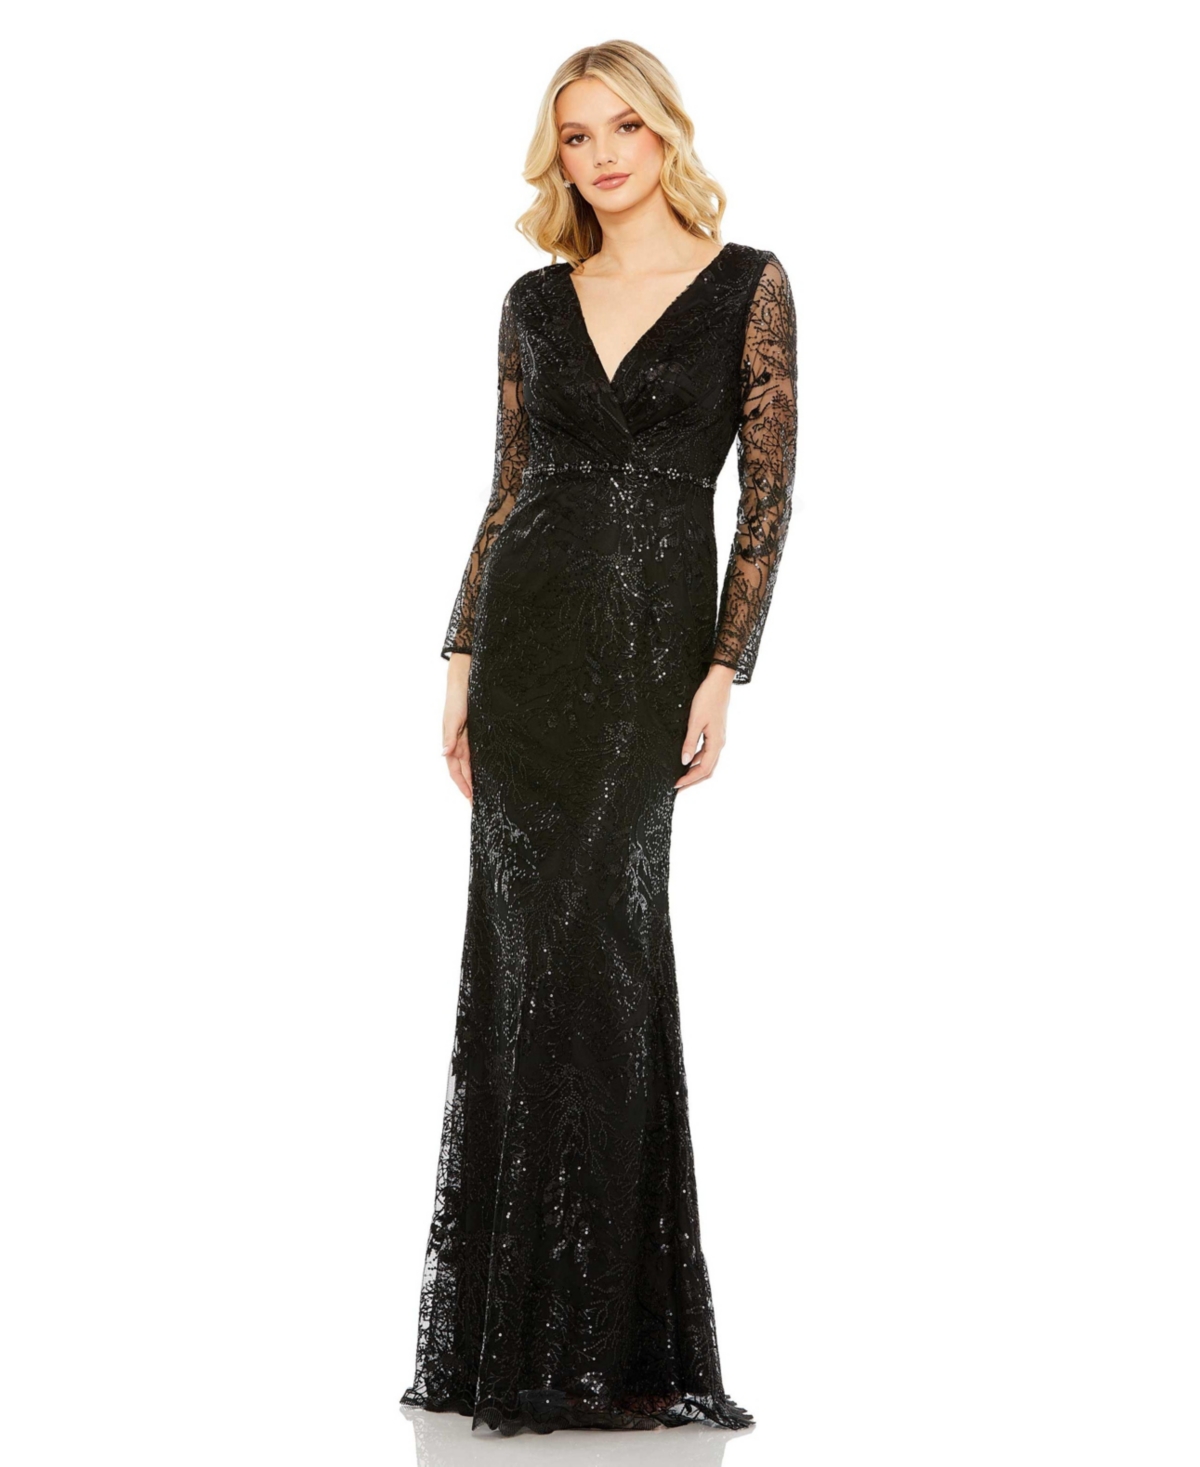 MAC DUGGAL WOMEN'S EMBELLISHED WRAP OVER LONG SLEEVE GOWN